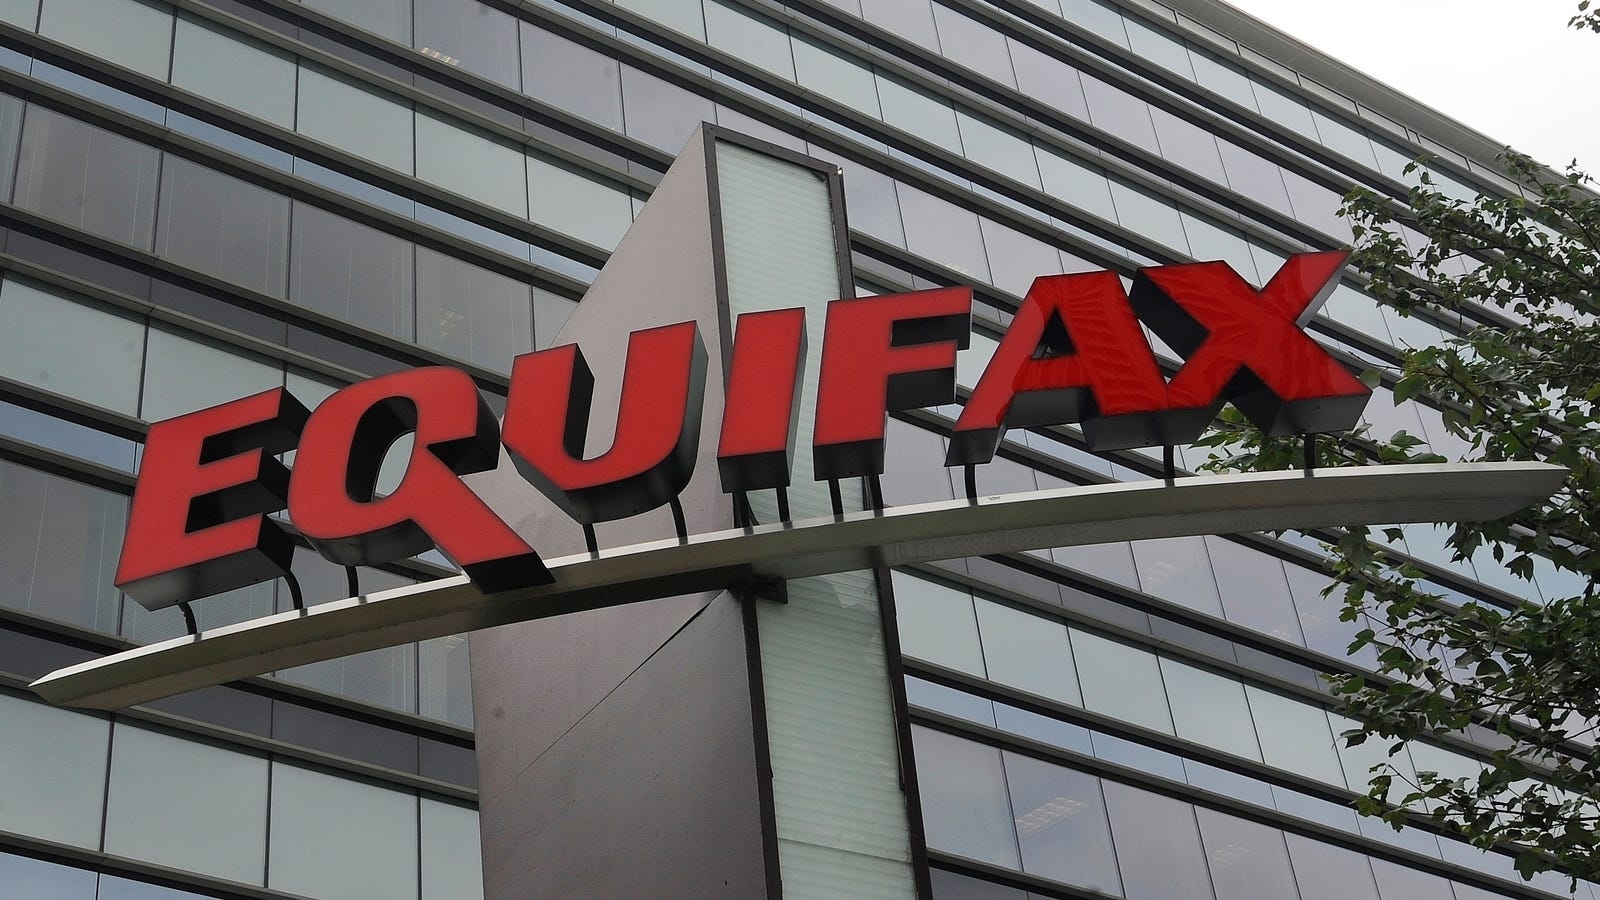 equifax lift credit freeze temporary